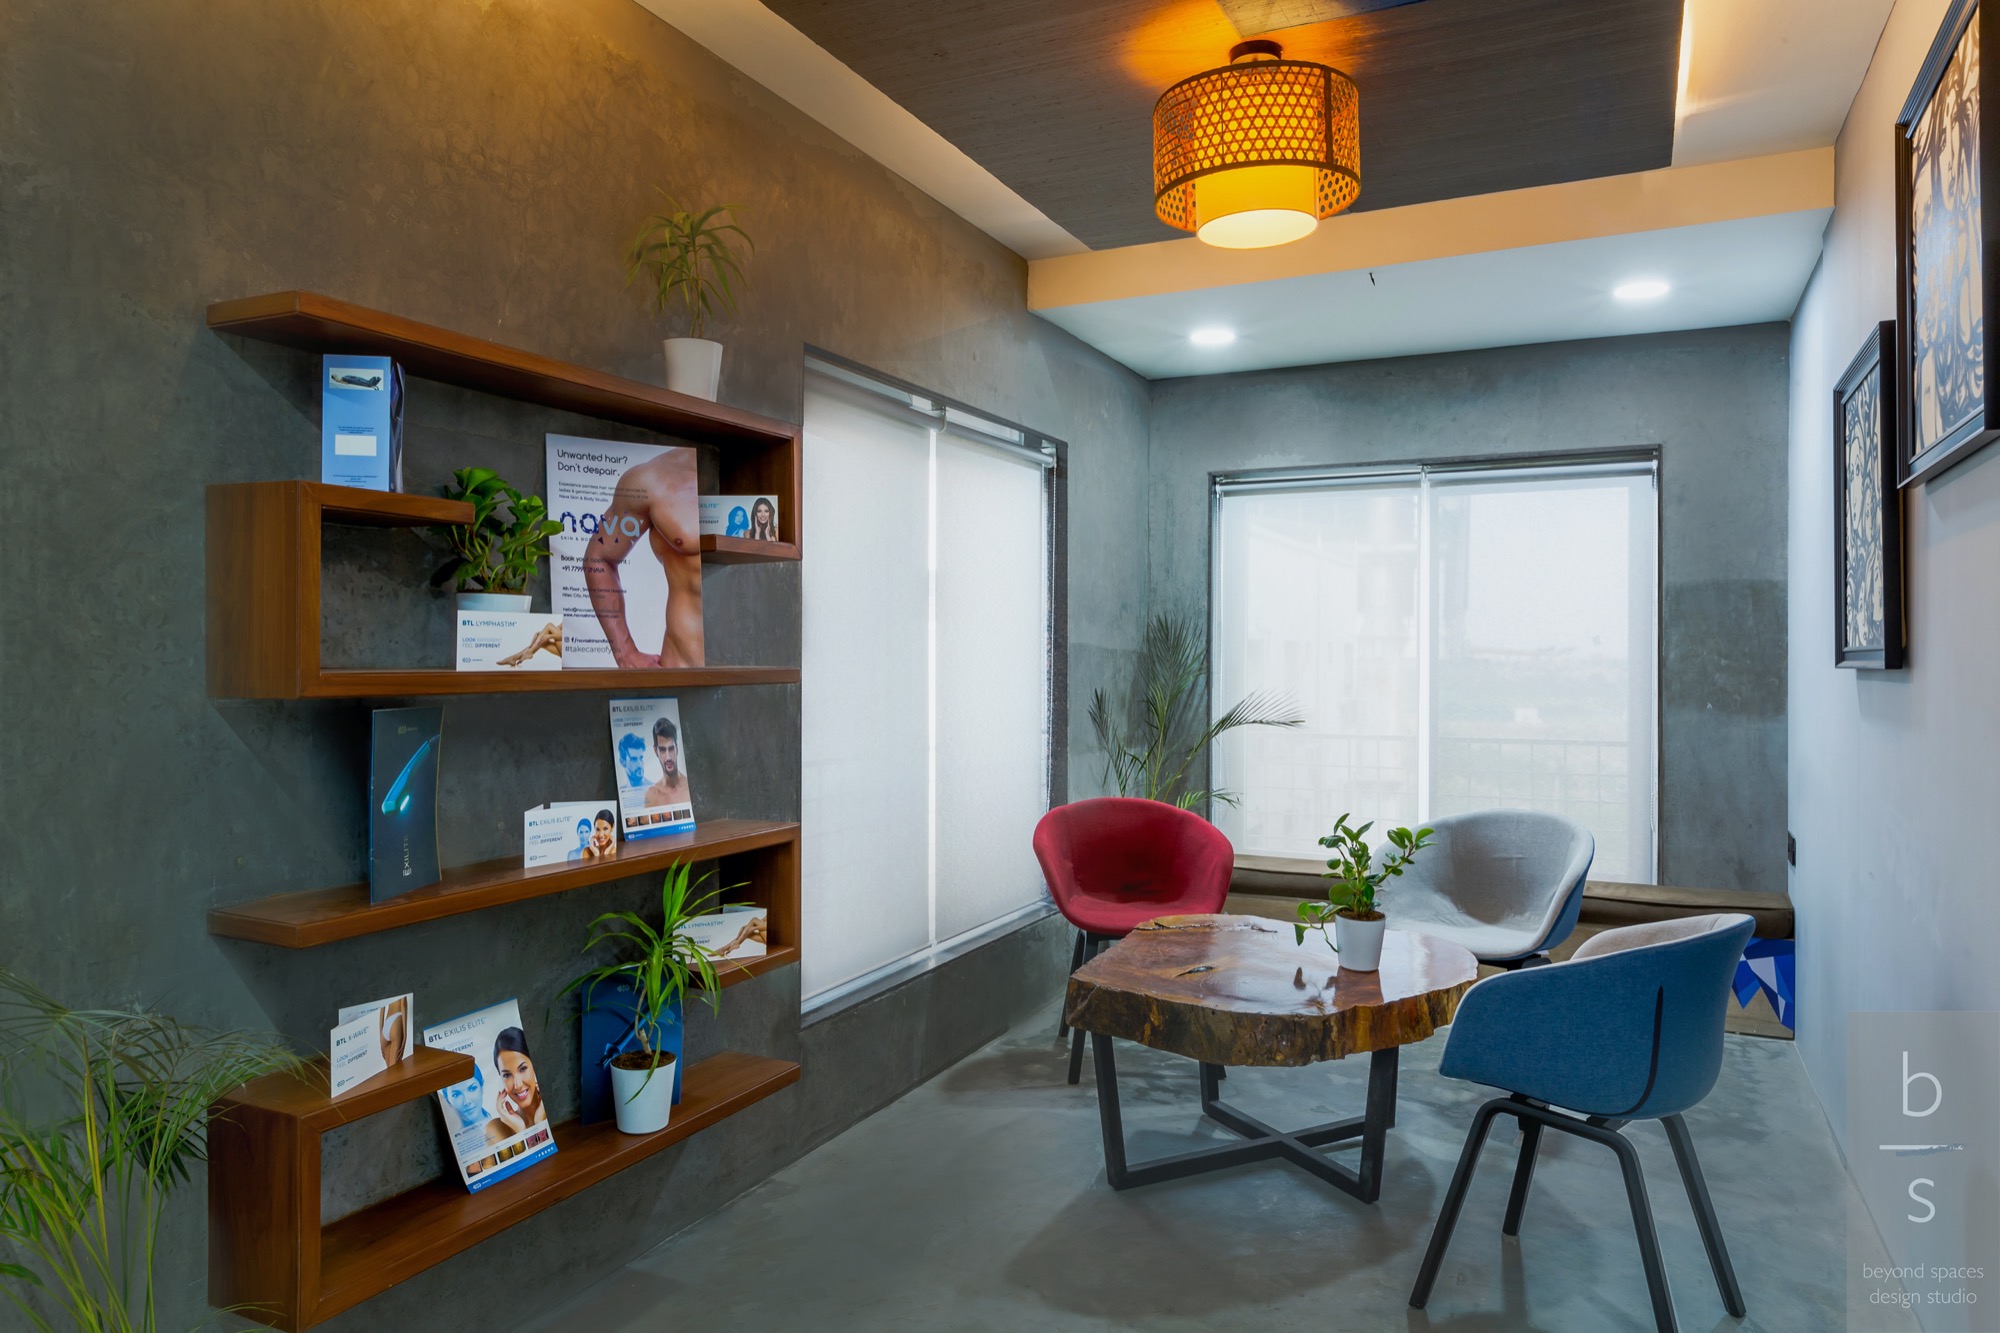 Nava Clinic at Hyderabad, An Earthy Oasis of Wellness, designed by Beyond Spaces Design Studio 2